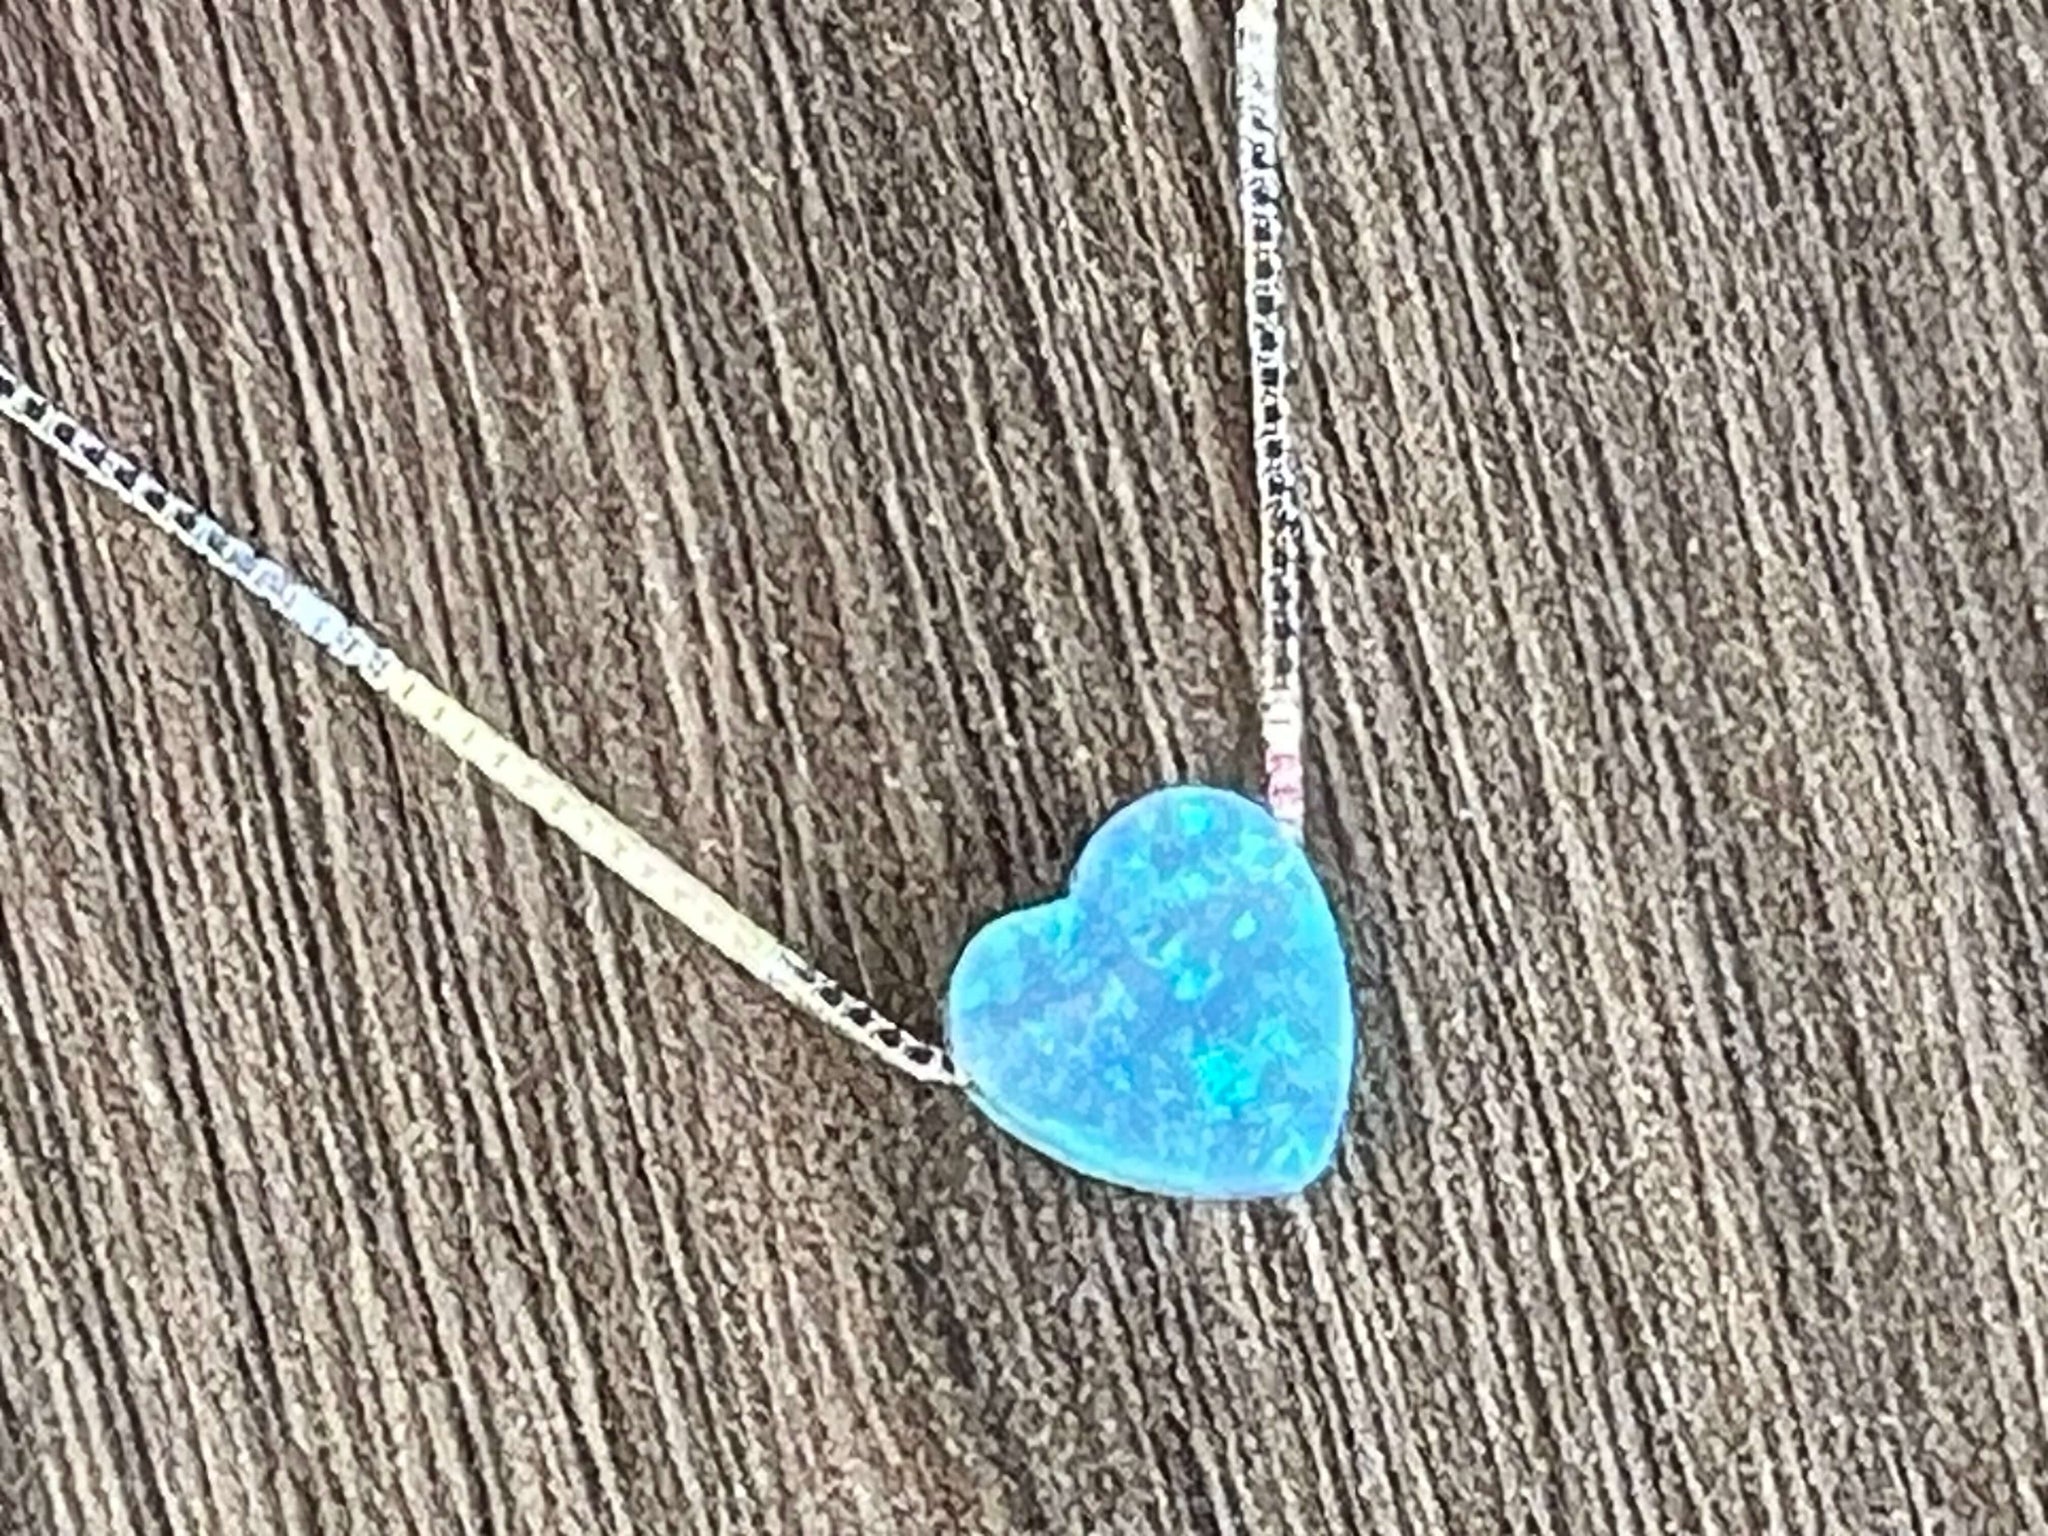 Small Opal Heart Charm Sterling Silver or 14kt Gold Filled  Necklace